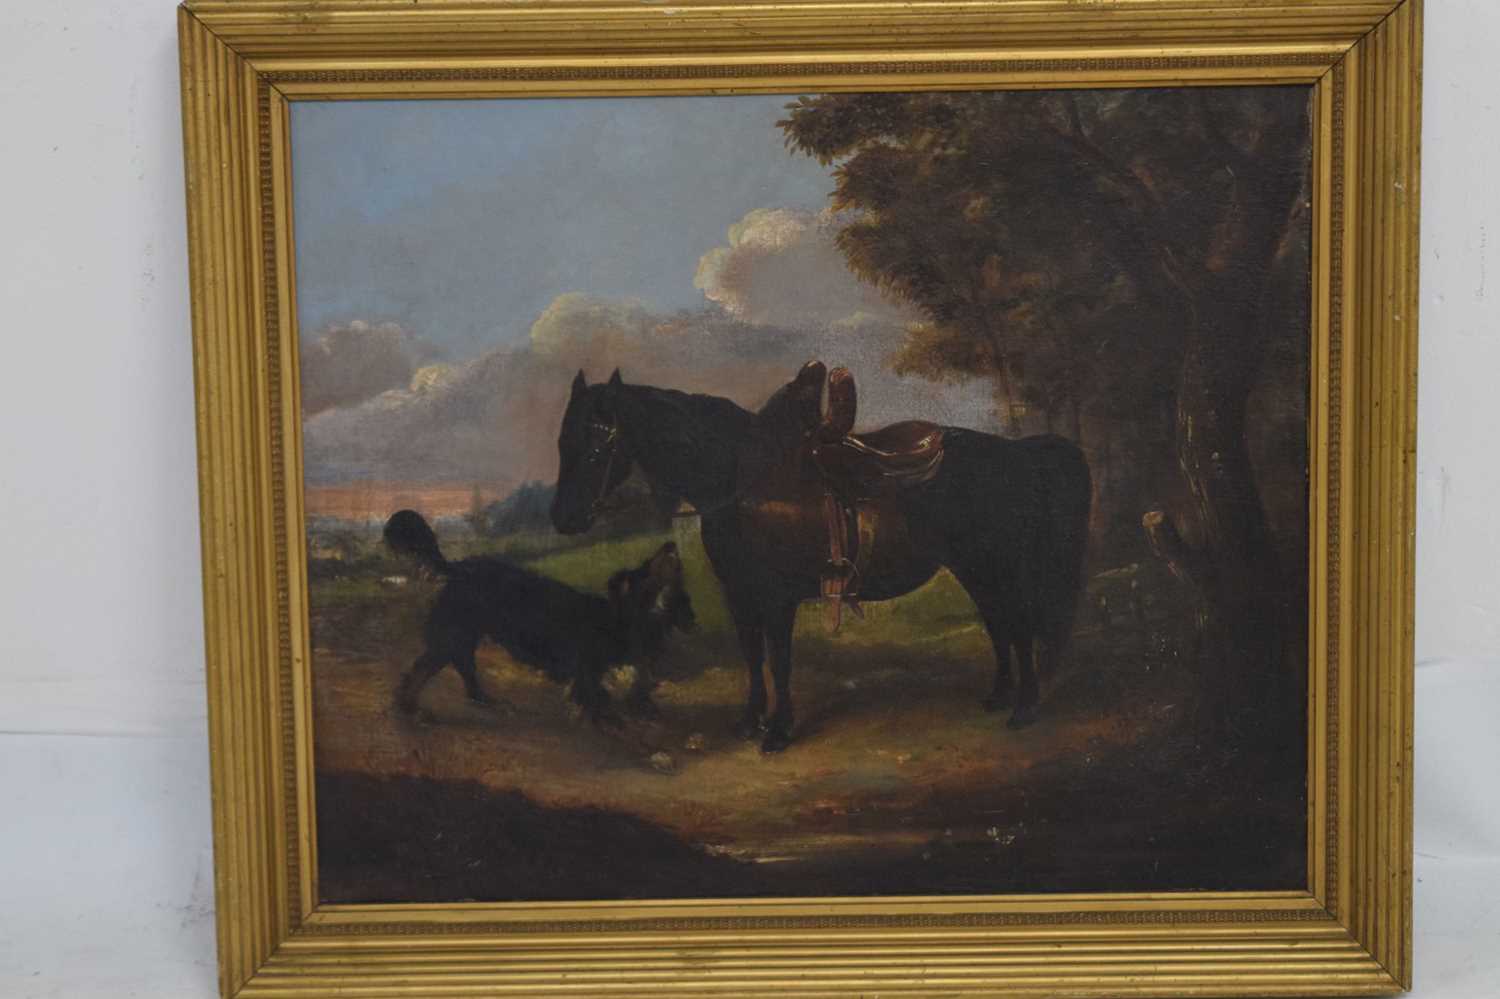 19th century oil on canvas - Horse and dog in a rural setting - Image 2 of 11